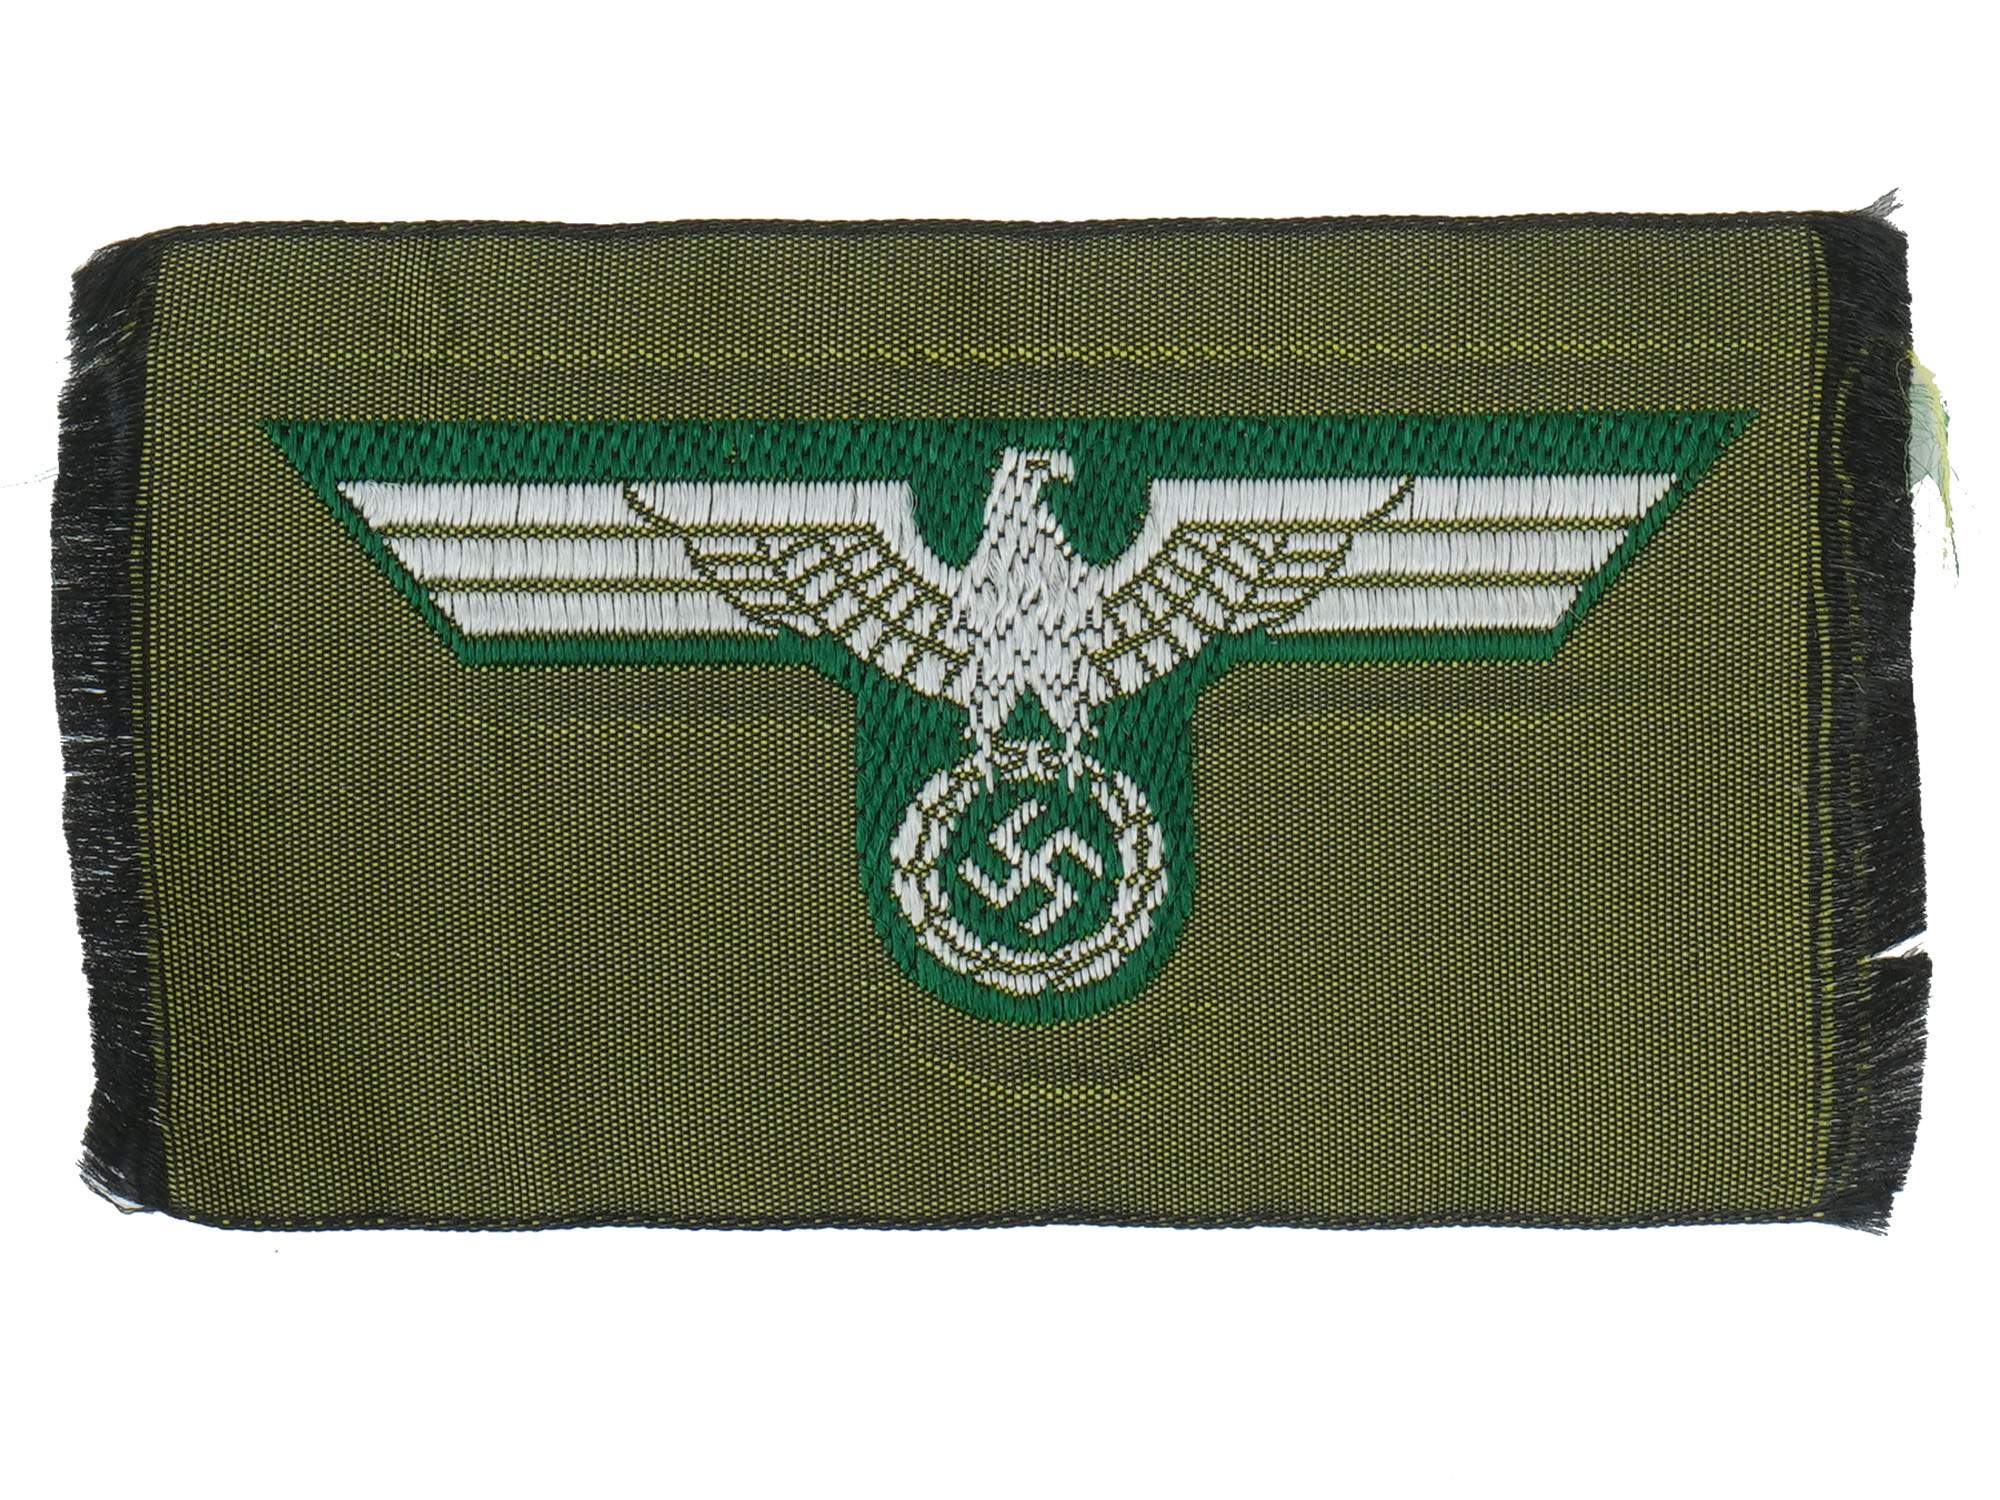 WWII GERMAN NAZI THIRD REICH FABRIC UNIFORM PATCHES PIC-7